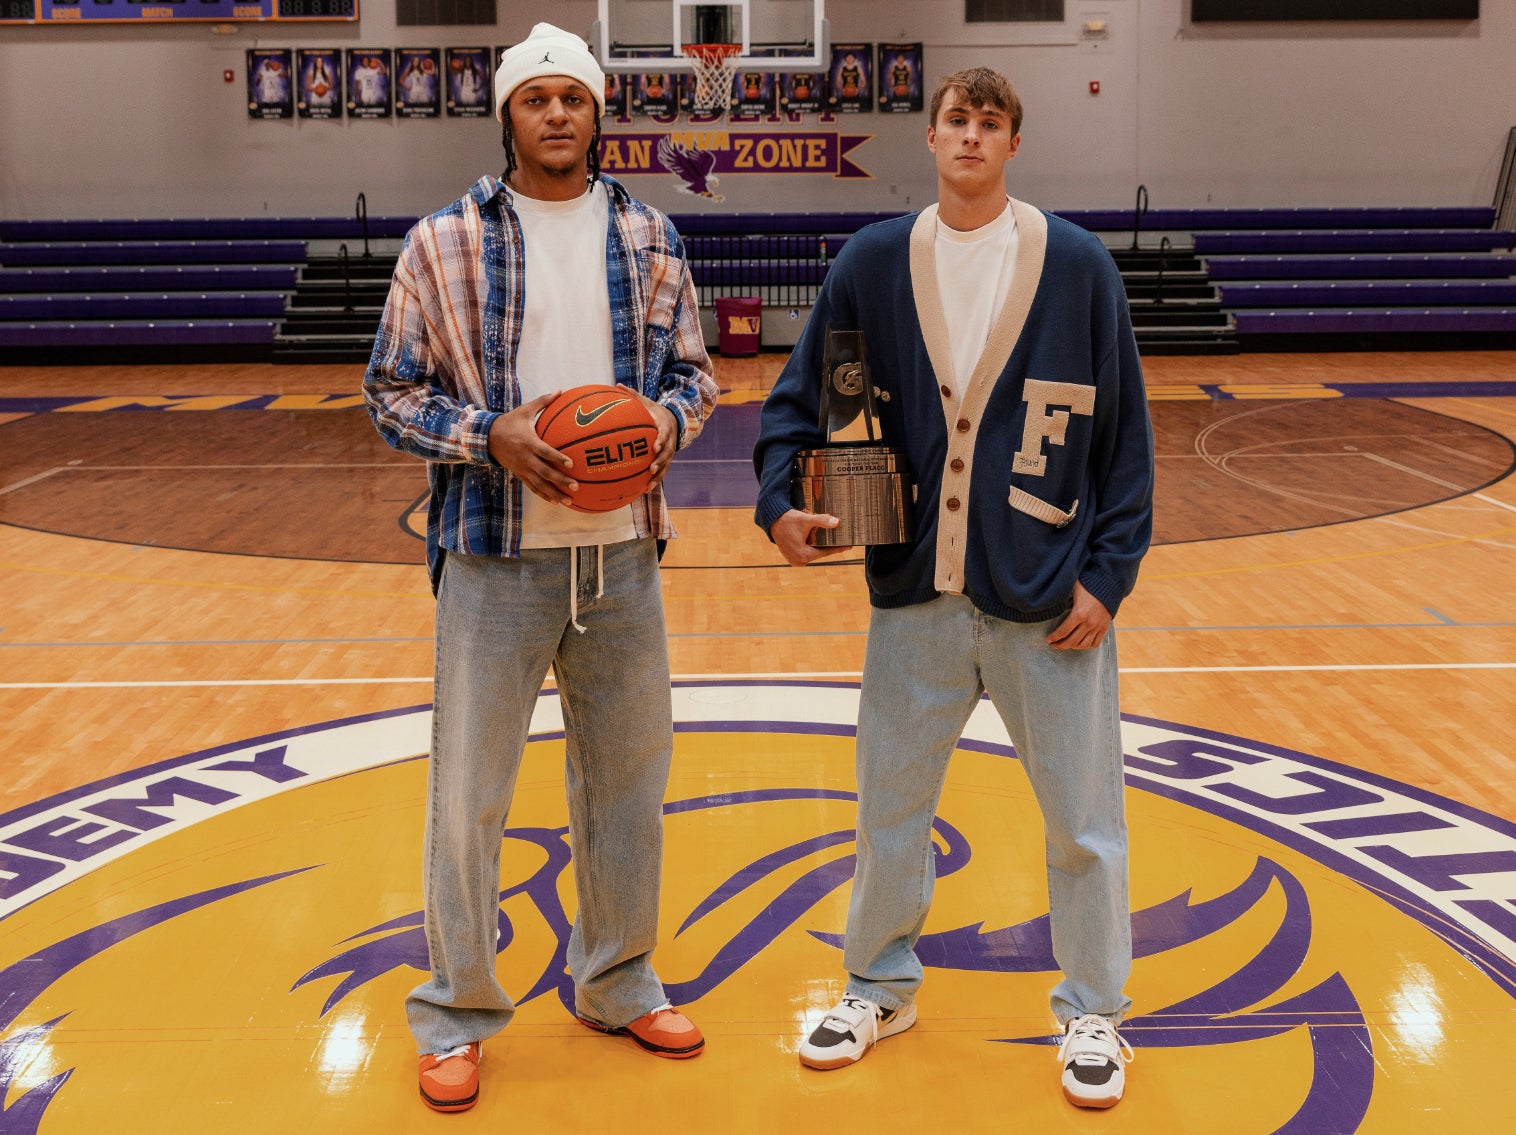 Two individuals standing on a basketball court, one holding a basketball, both wearing casual attire with prominent lettering